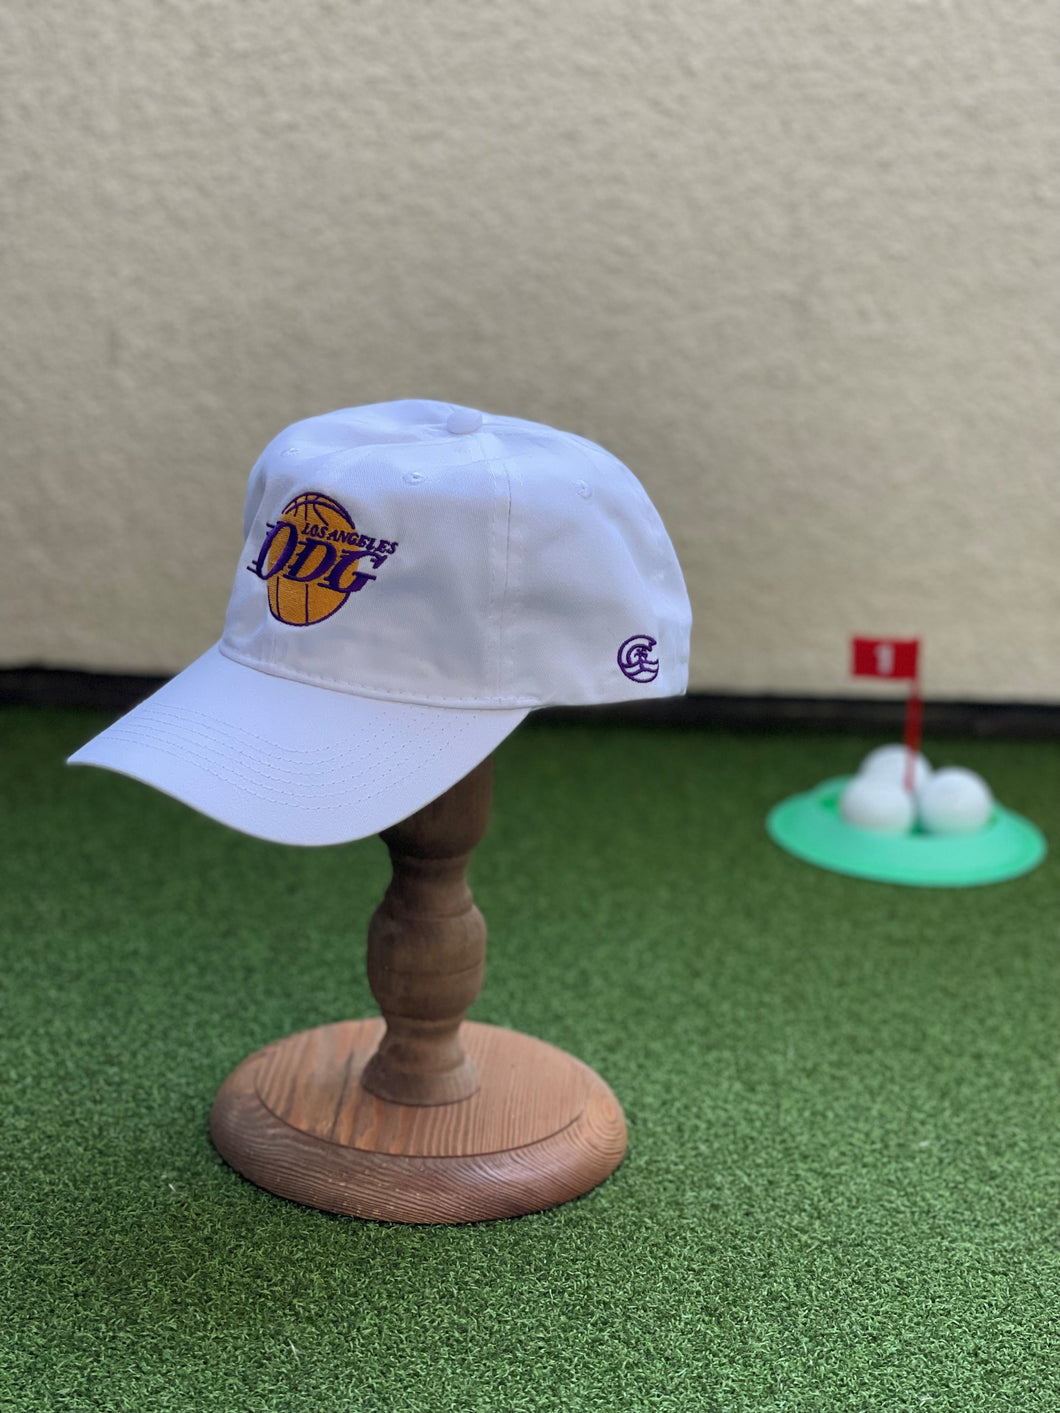 ODG Limited Edition Lakers Ball Cap Mens/Womens